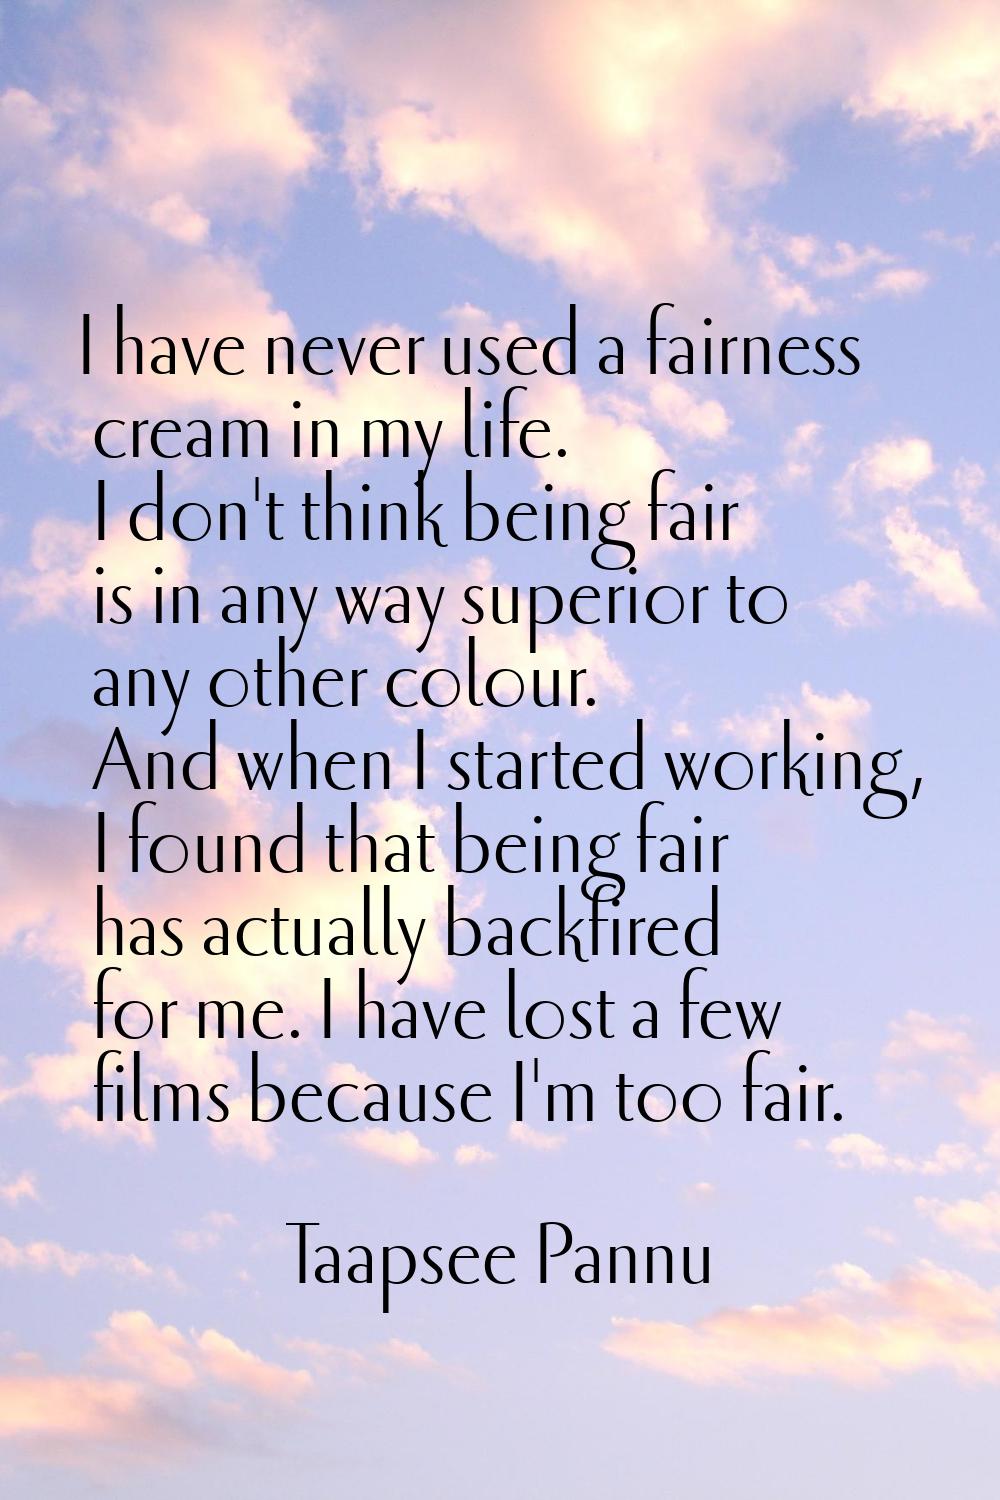 I have never used a fairness cream in my life. I don't think being fair is in any way superior to a